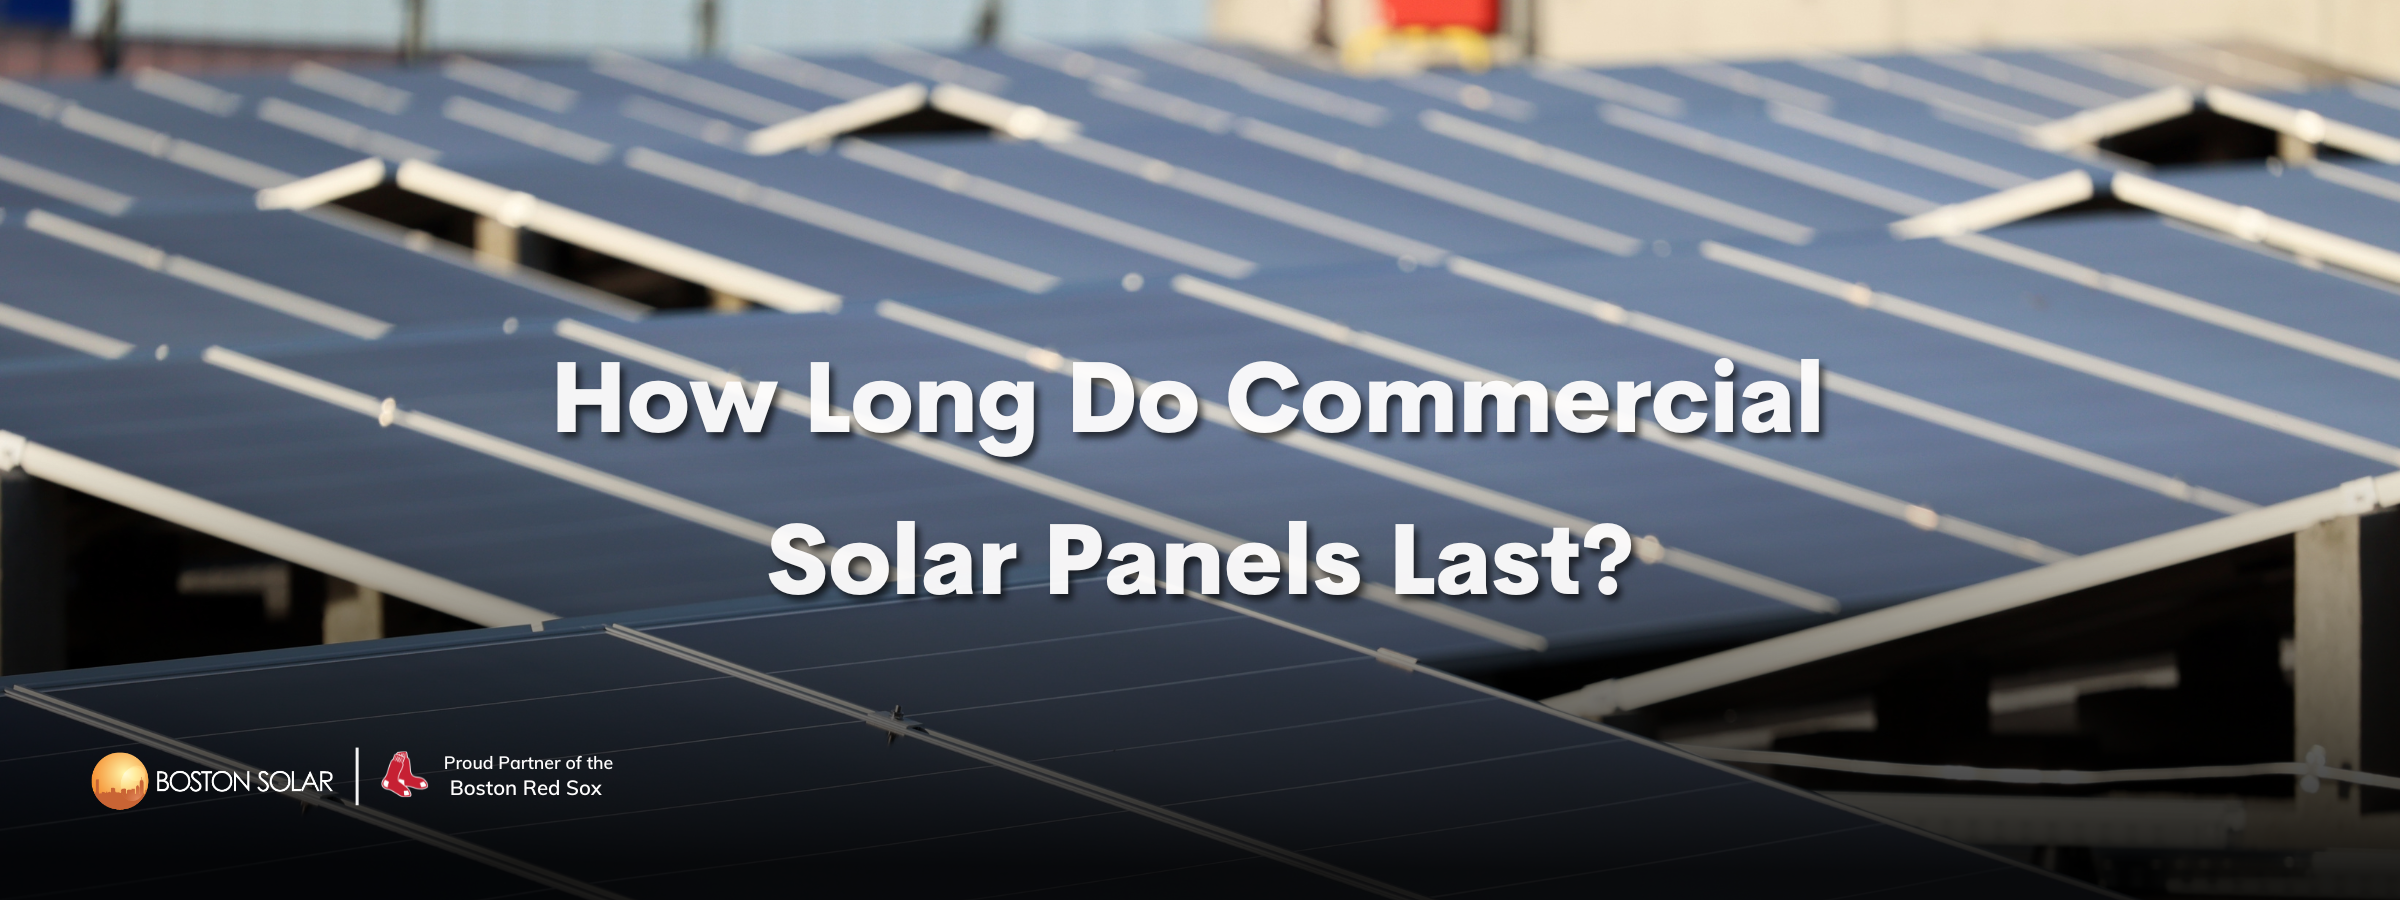 What Is the Life Expectancy of Commercial Solar Panels?